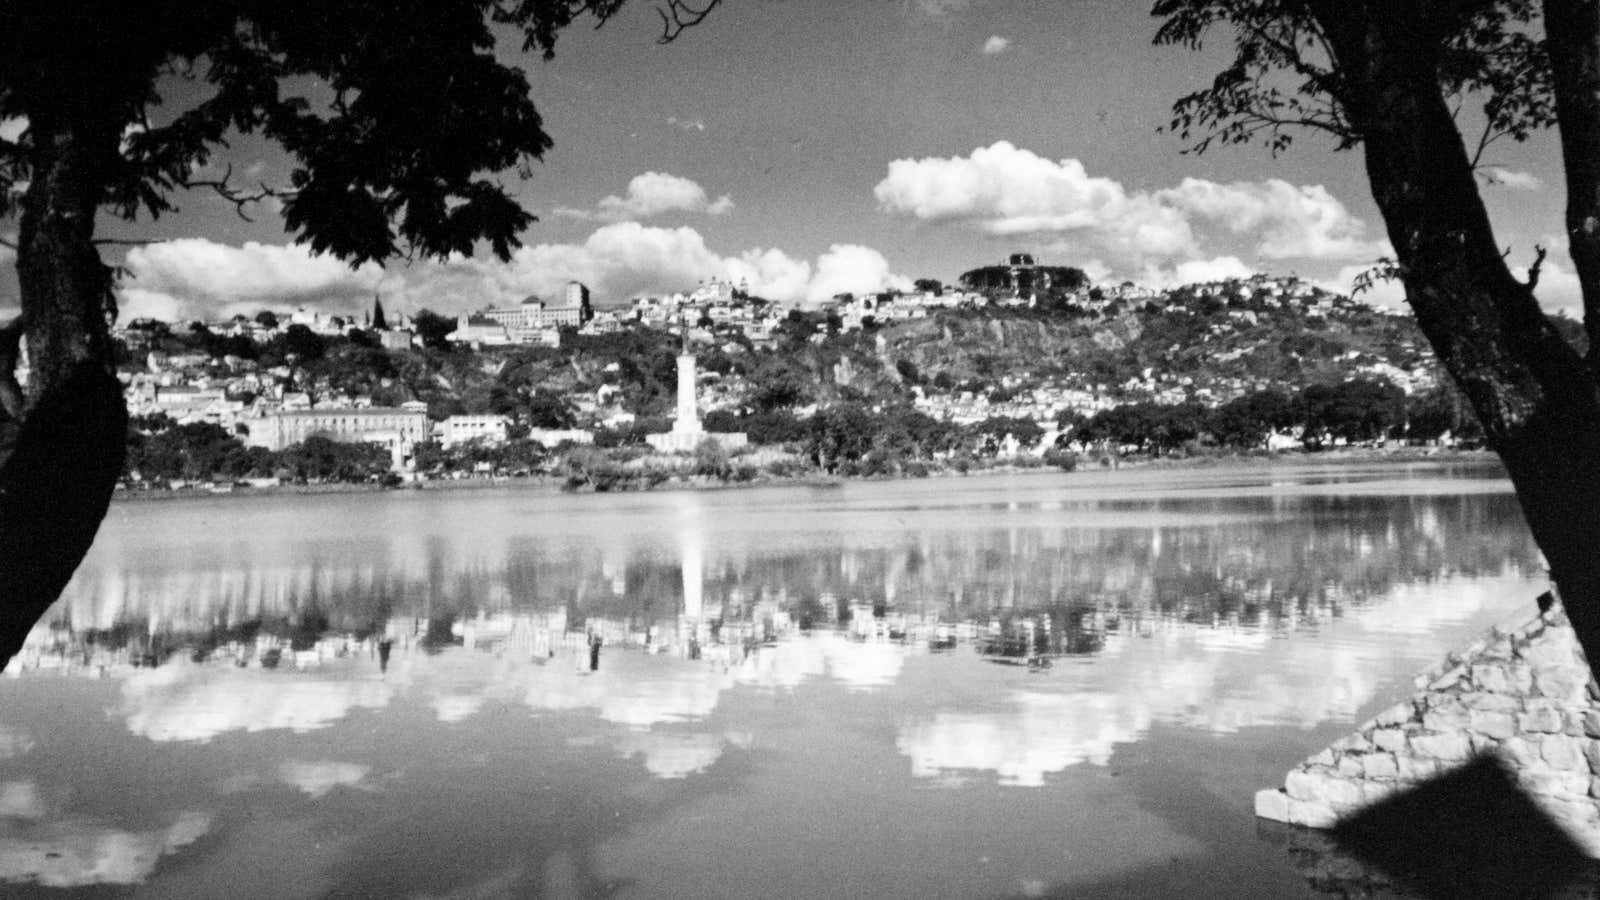 Paying homage to Ramily, the father of black and white photography in Madagascar